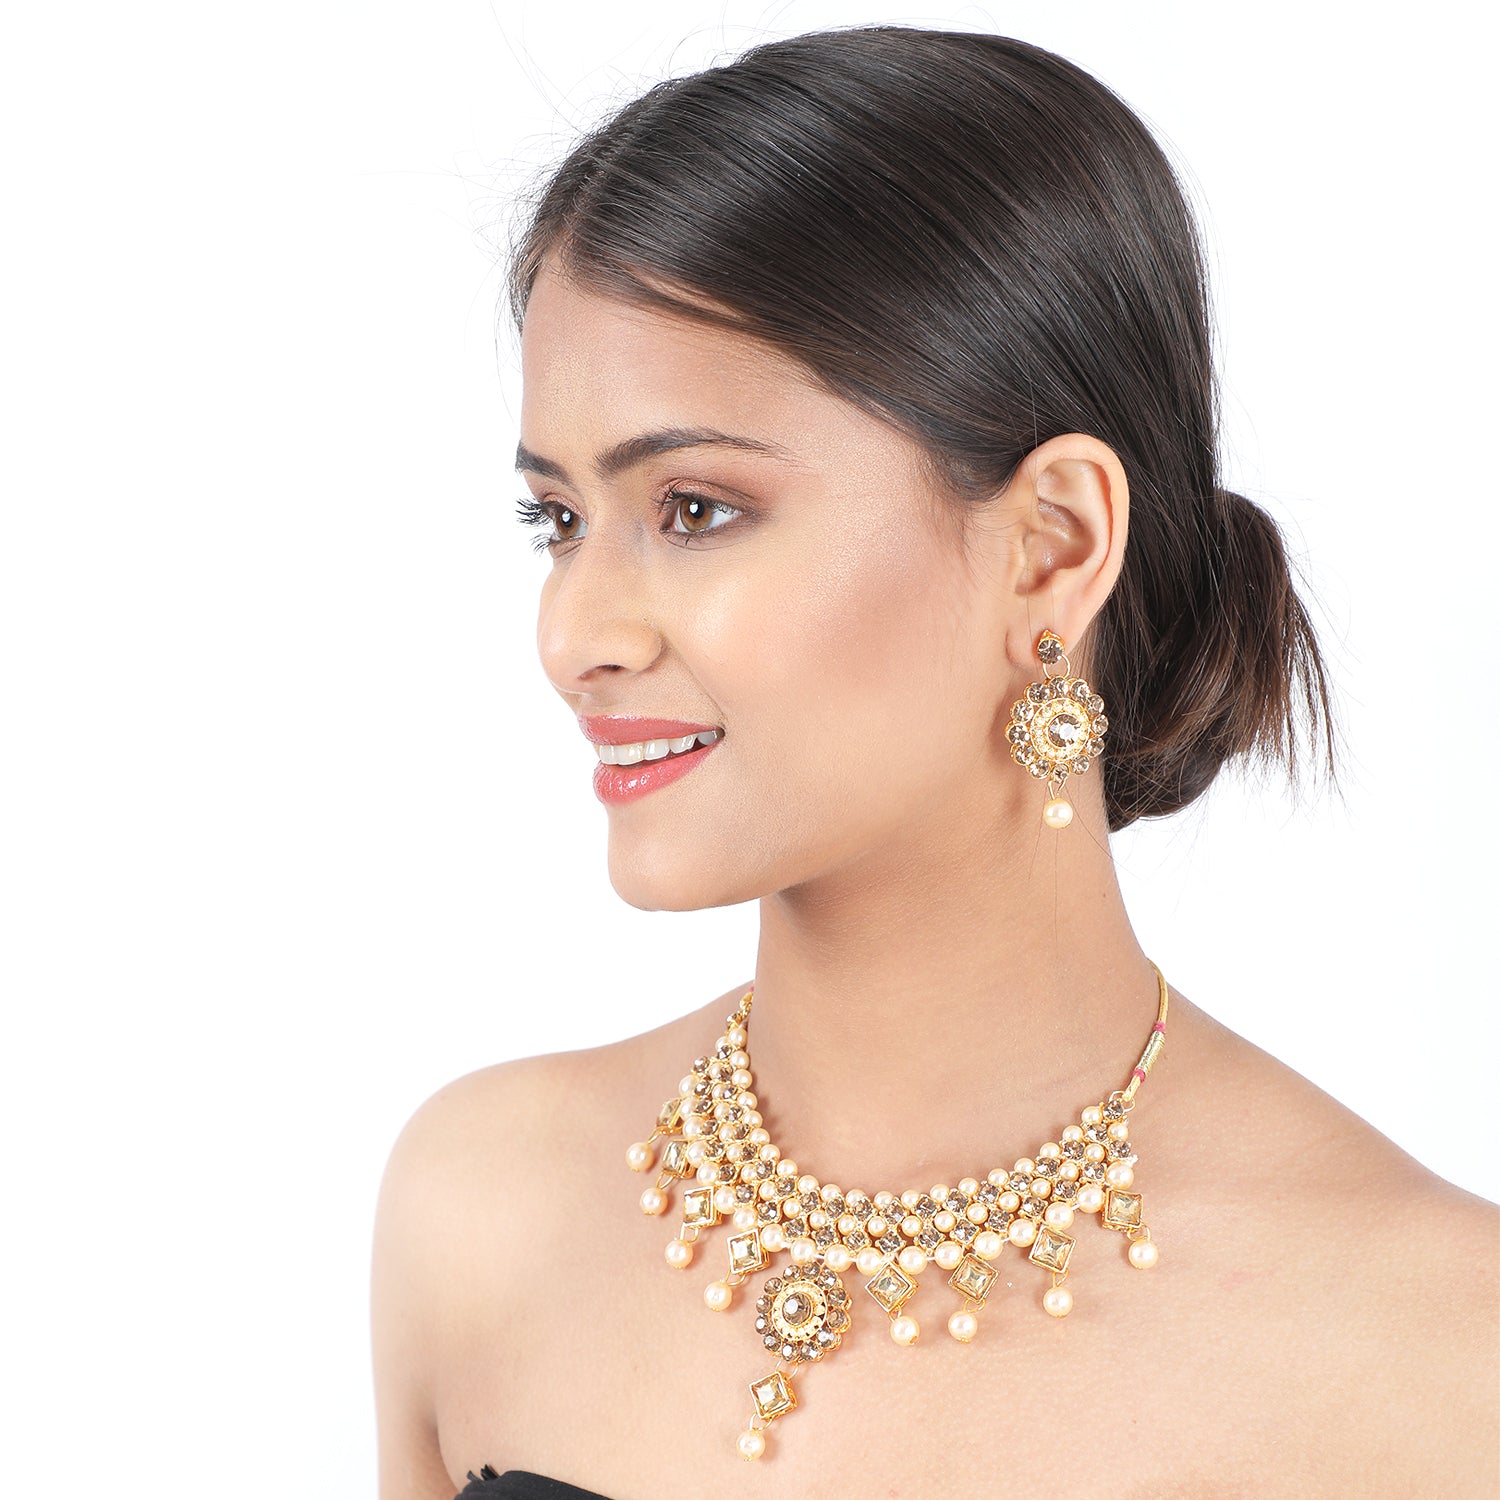 Women's Stylish Gold Choker Necklace With Maang Tikka Earrings  - Zaffre Collections